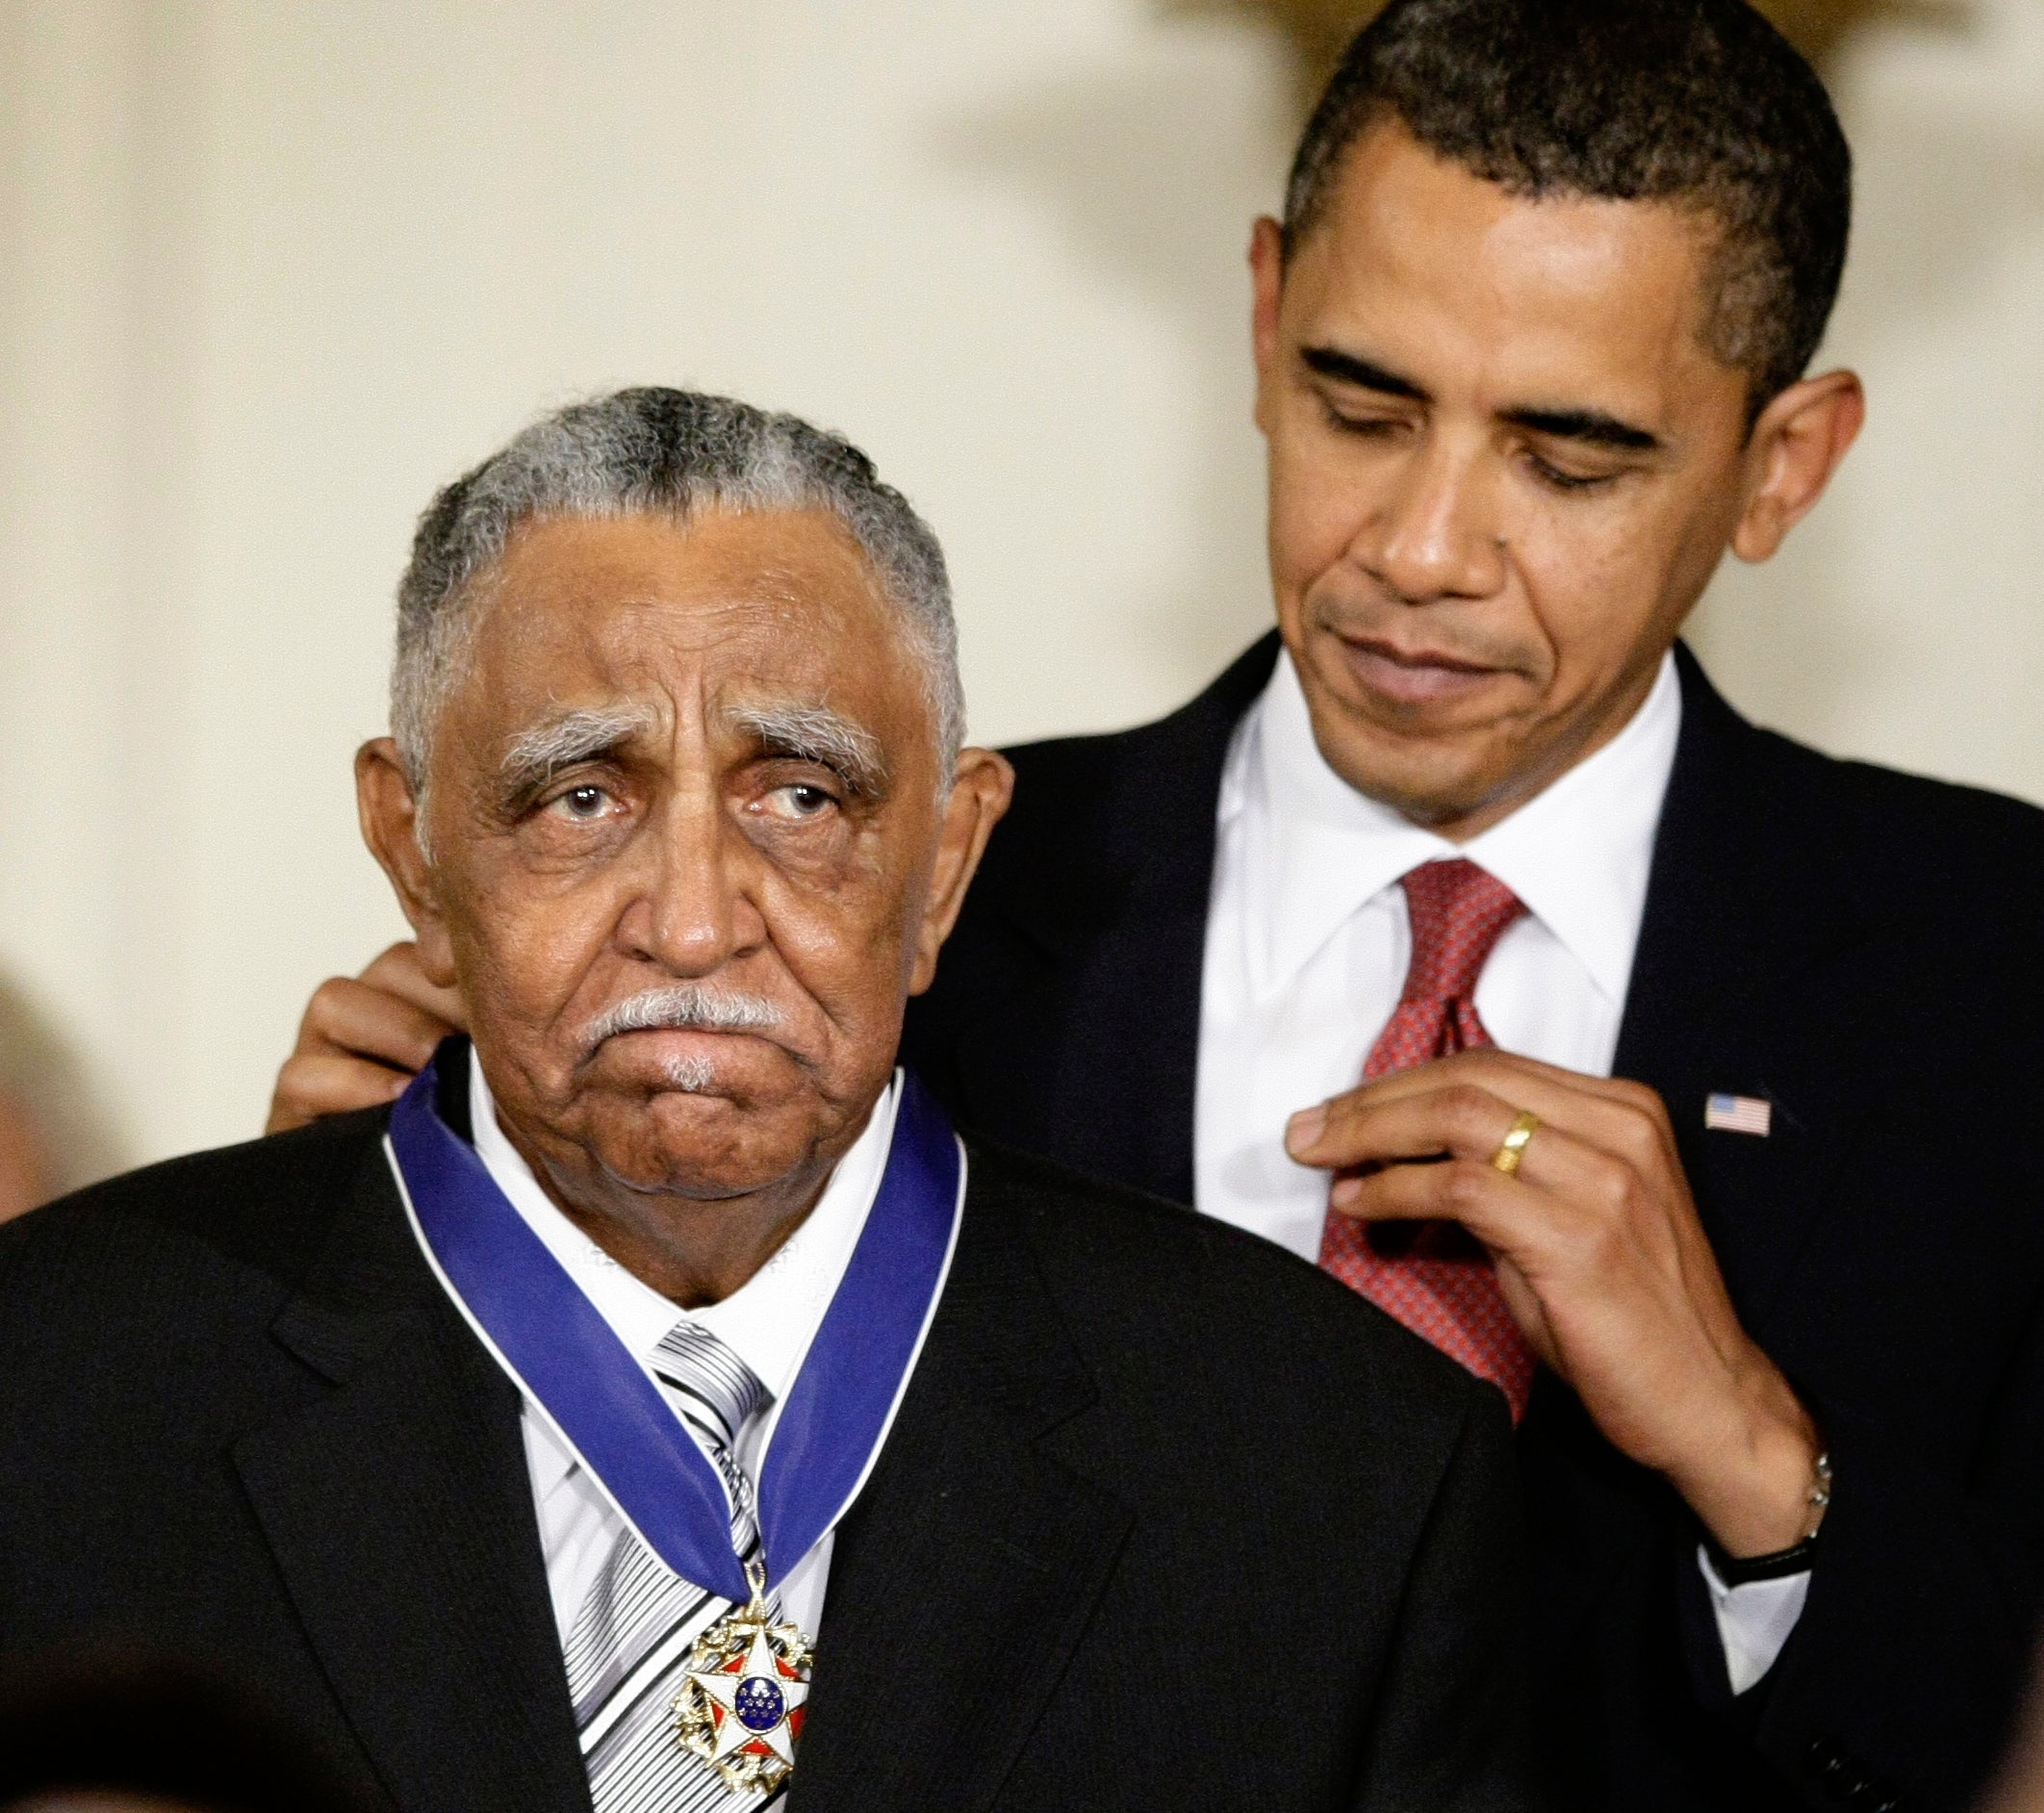 &#13;
Barack Obama presents a Presidential Medal of Freedom to Lowery in 2009 &#13;